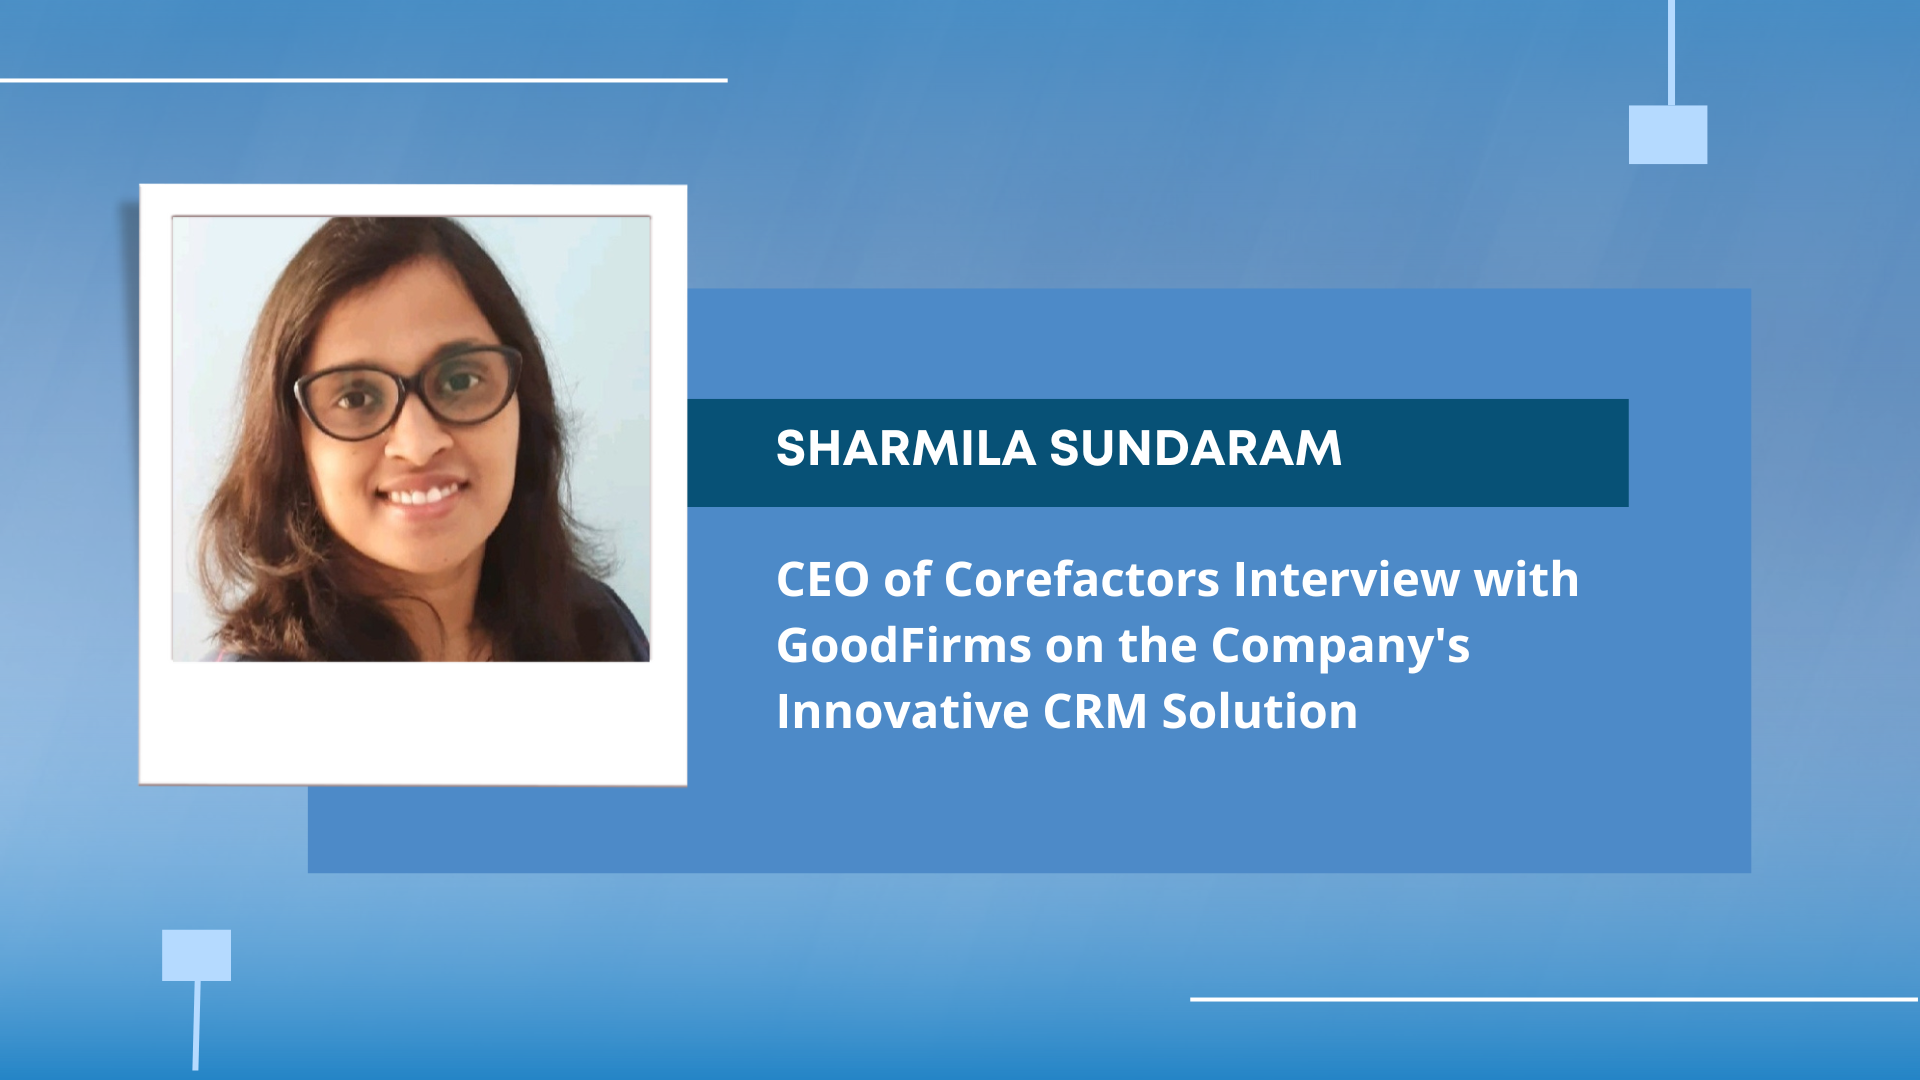 Sharmila Sundaram, CEO of Corefactors Interview with GoodFirms on the Company's Innovative CRM Solution